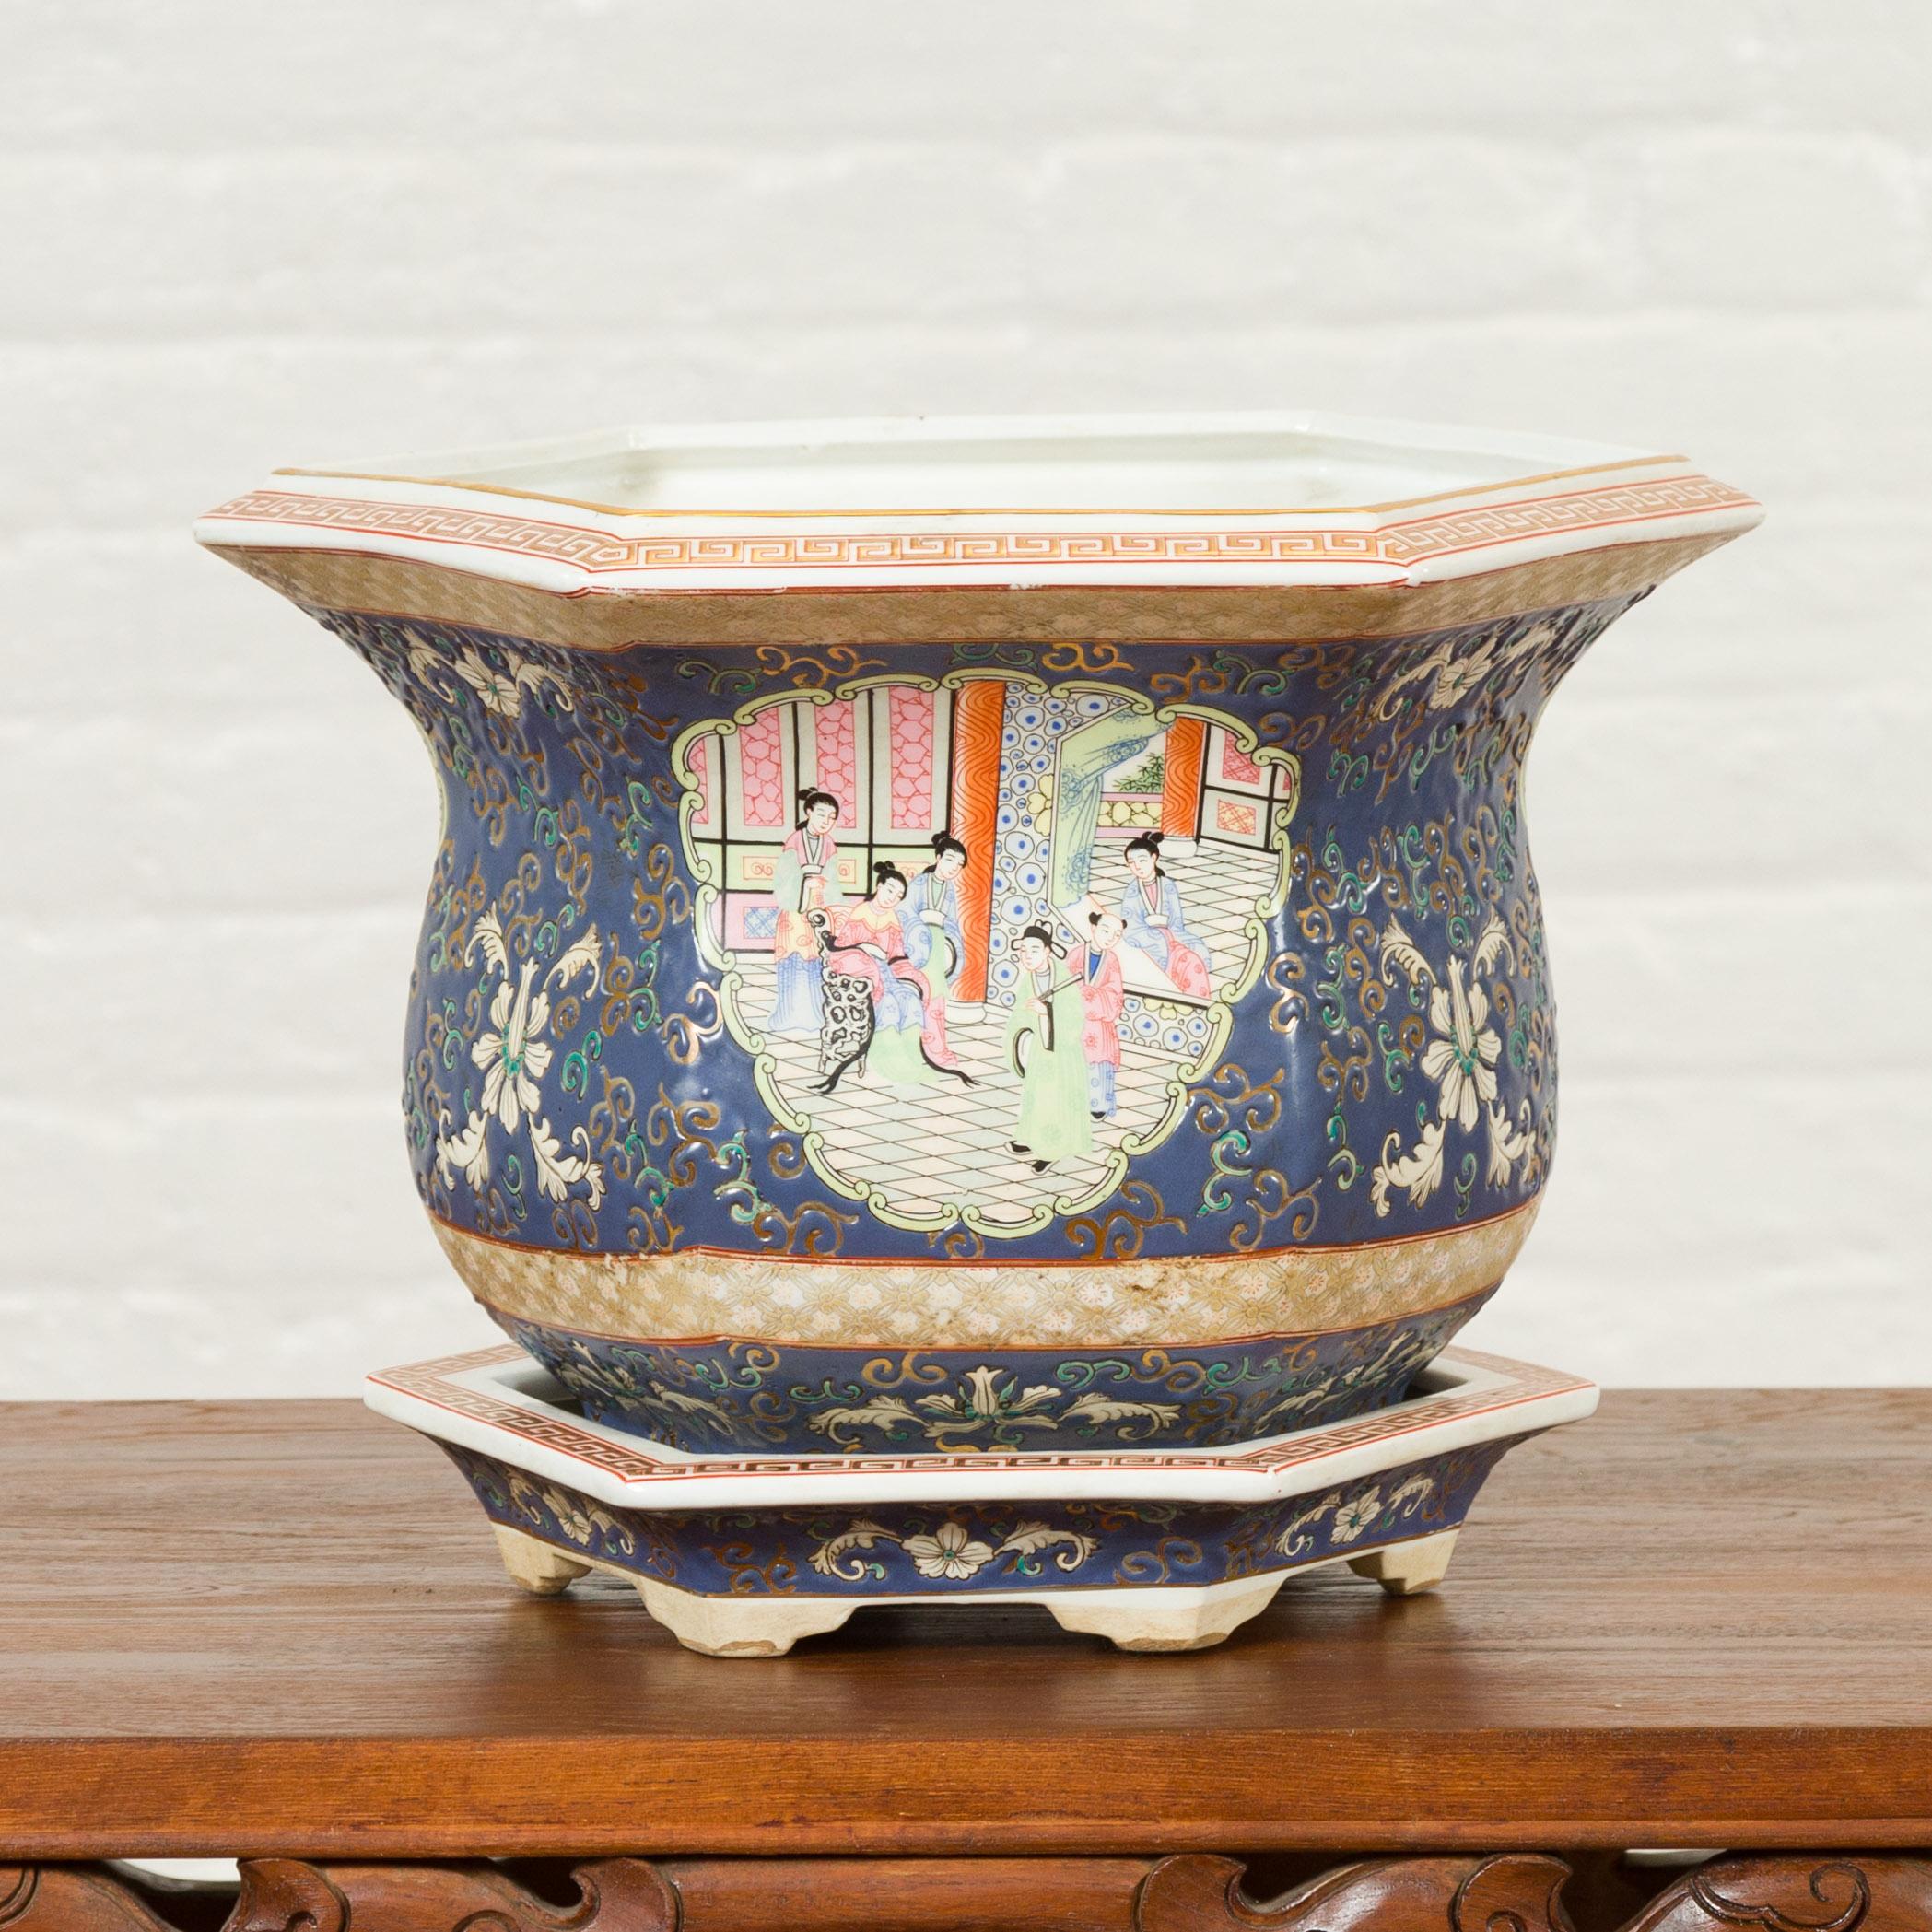 Hand-Painted Chinese Hexagonal Planter with Hand Painted Courtyard Scenes Depicting Maidens